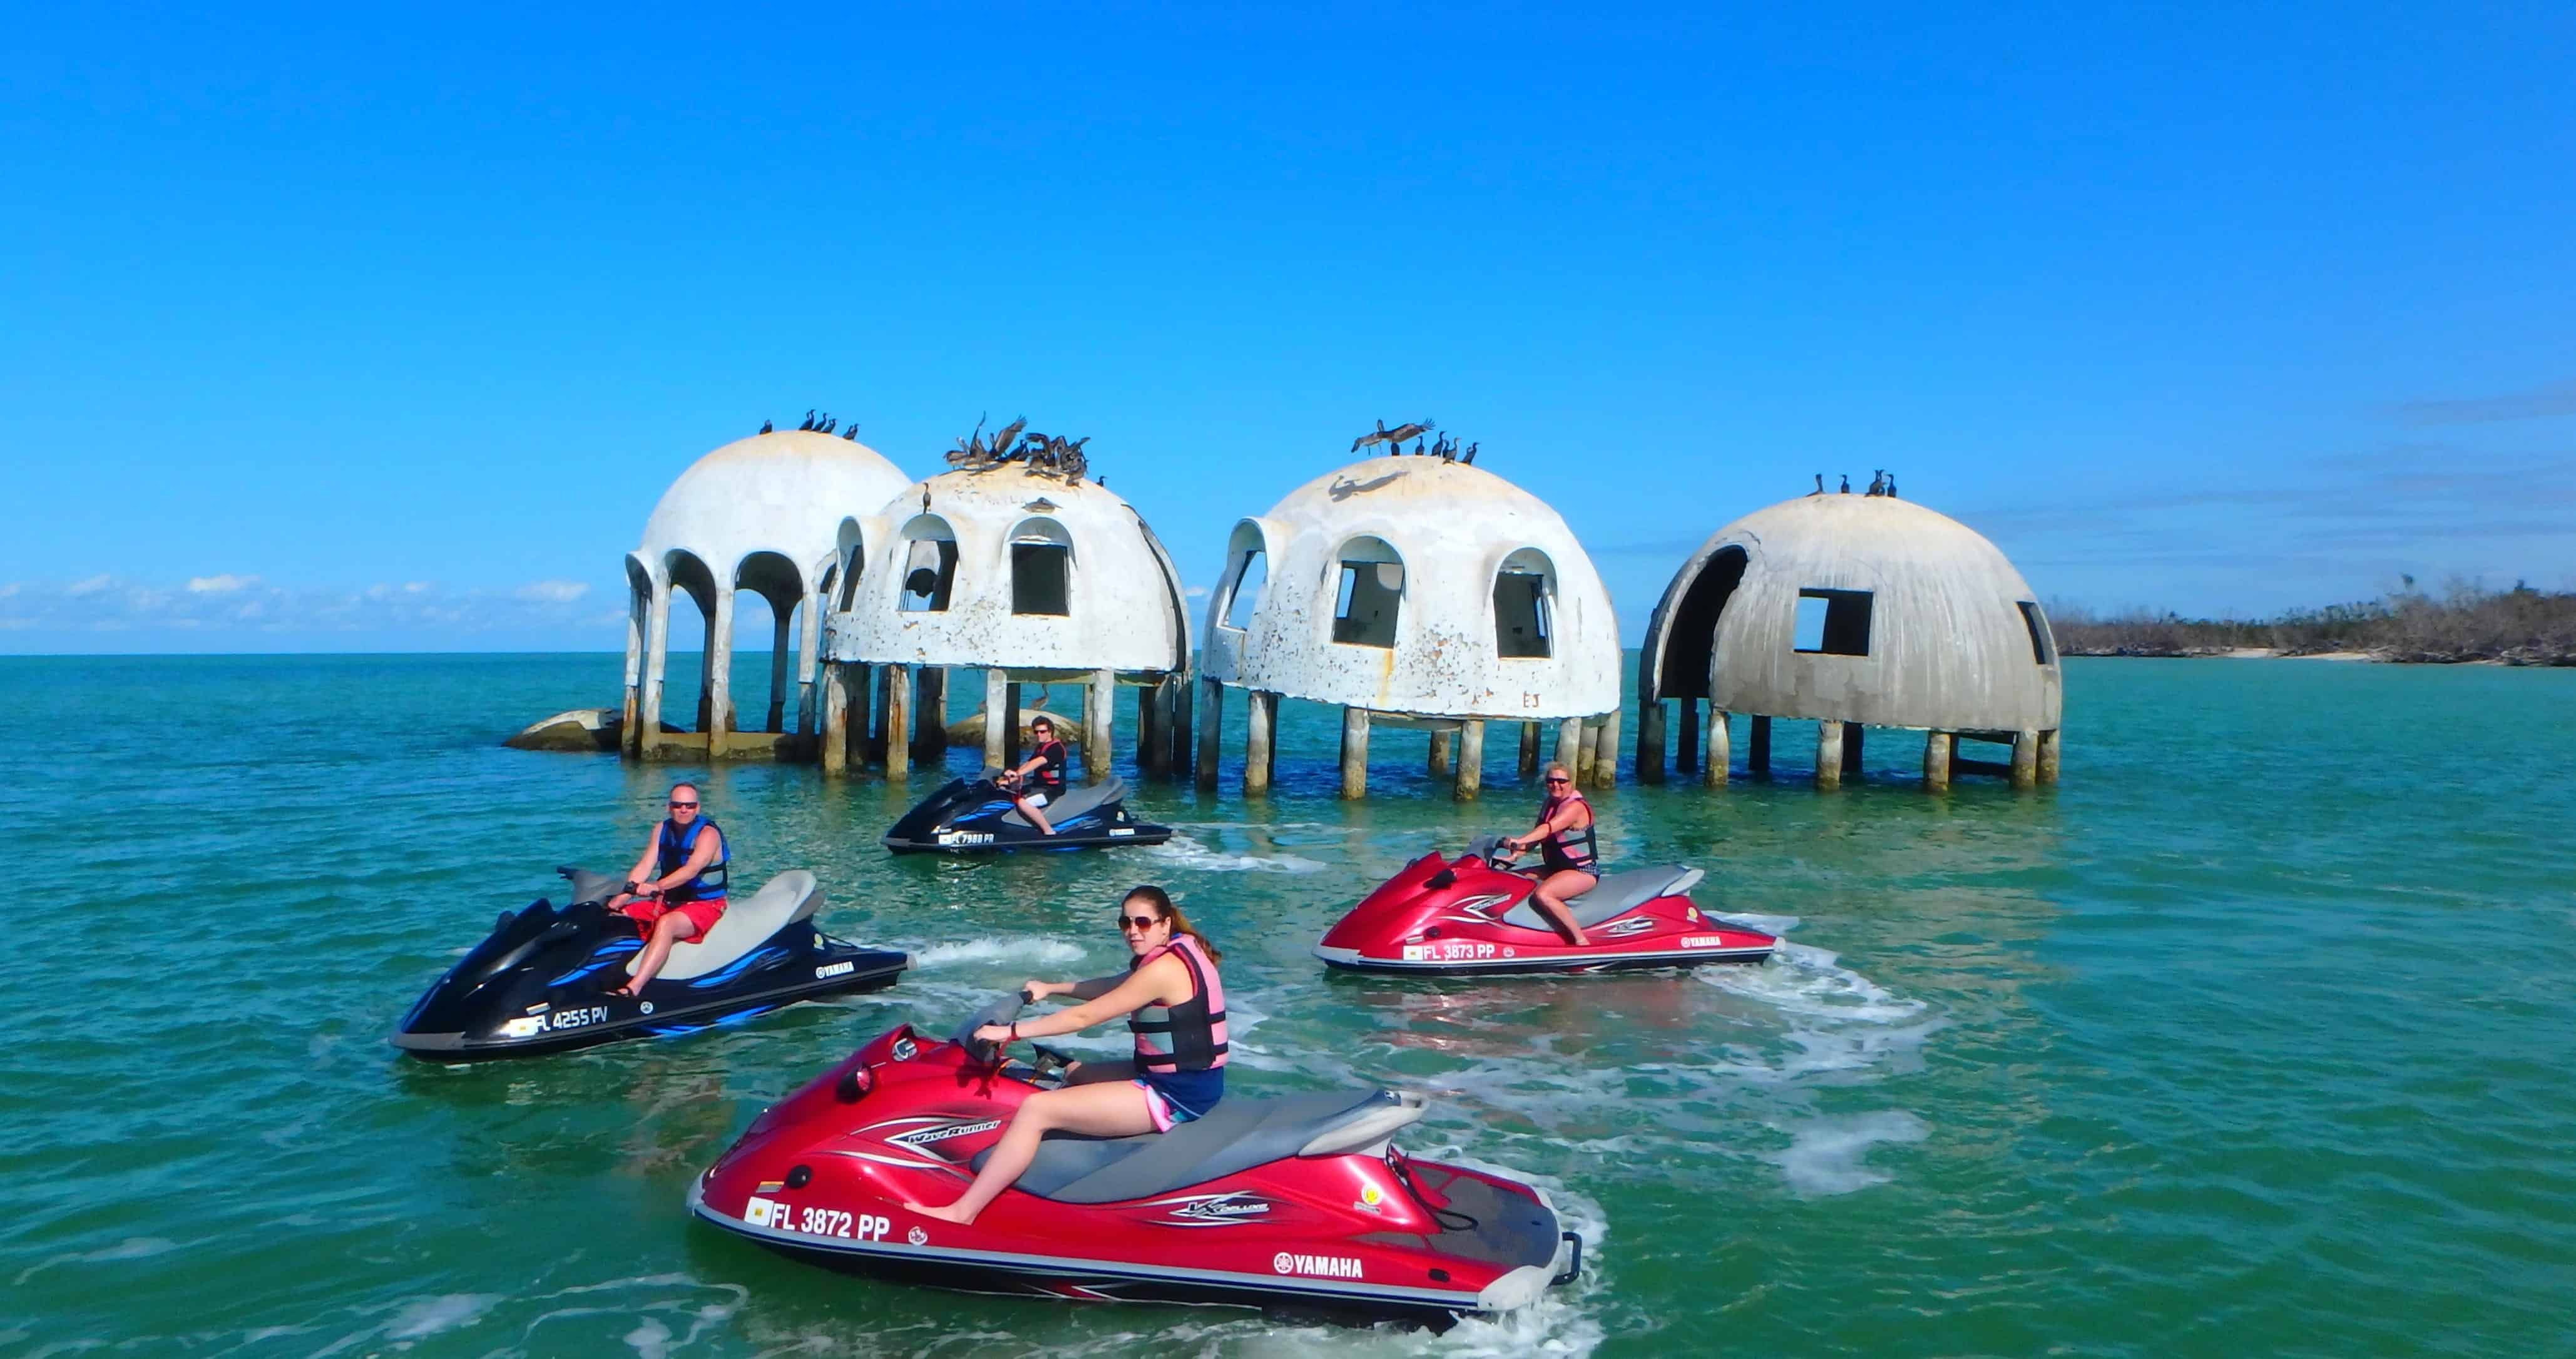 Jet Ski Dolphin Tour Experiencing The Joy Of Nature While Attending A